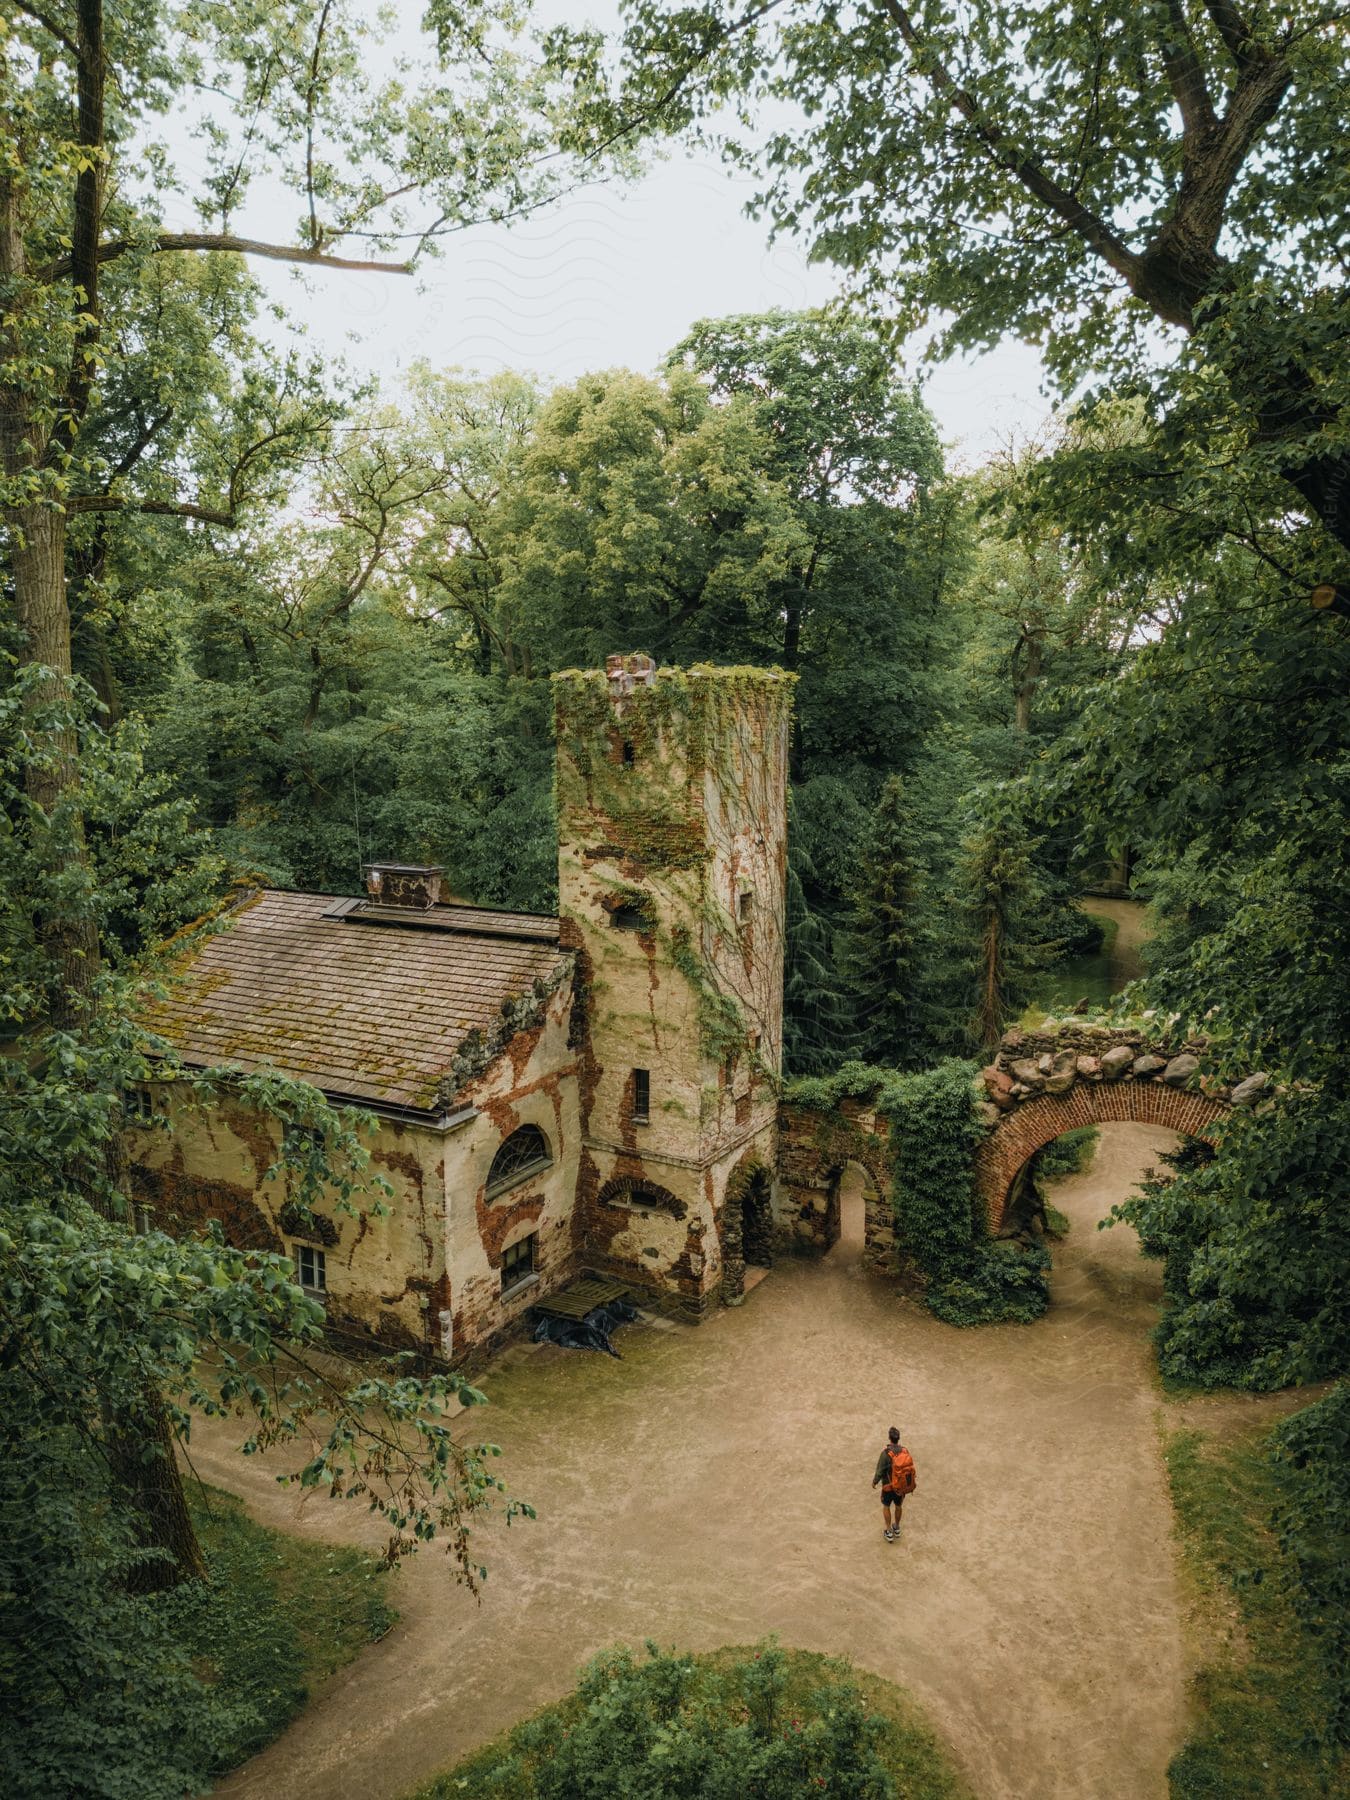 An ancient and partially ruined building is surrounded by lush greenery, with parts of its walls covered in ivy. A person walks near the building.